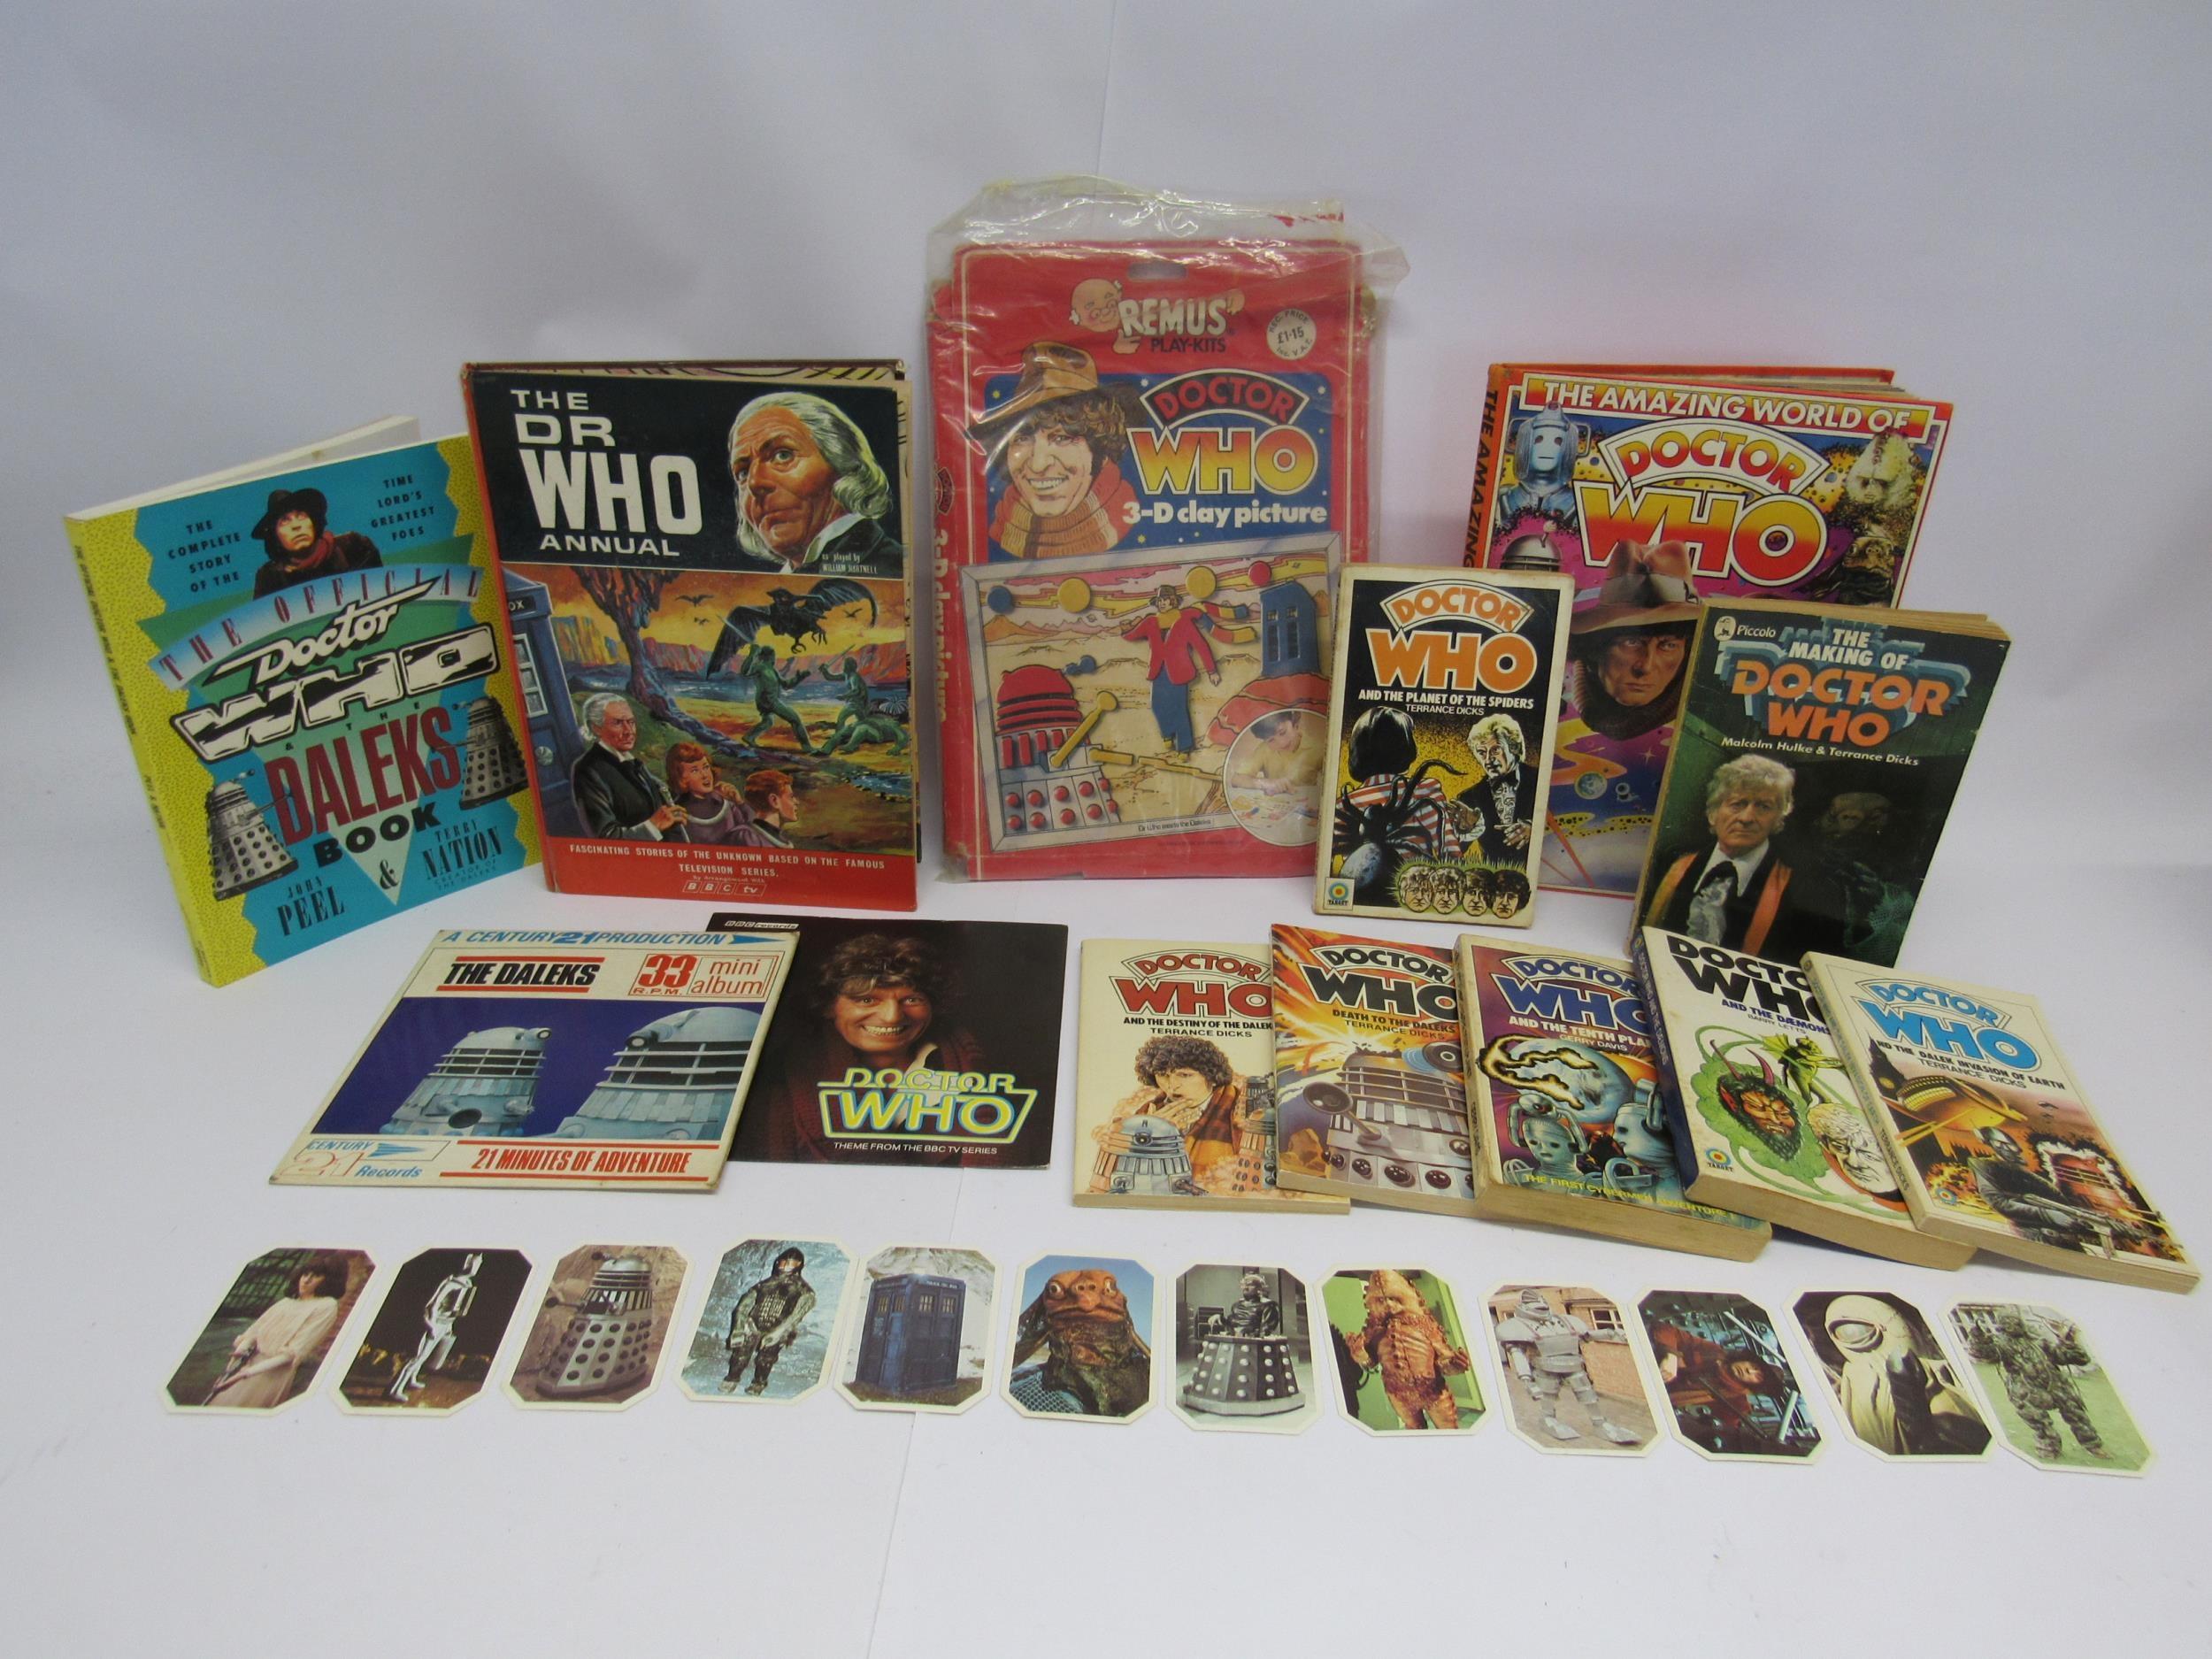 A collection of vintage Dr Who collectables including 1966 The Dr Who Annual with William Hartnell